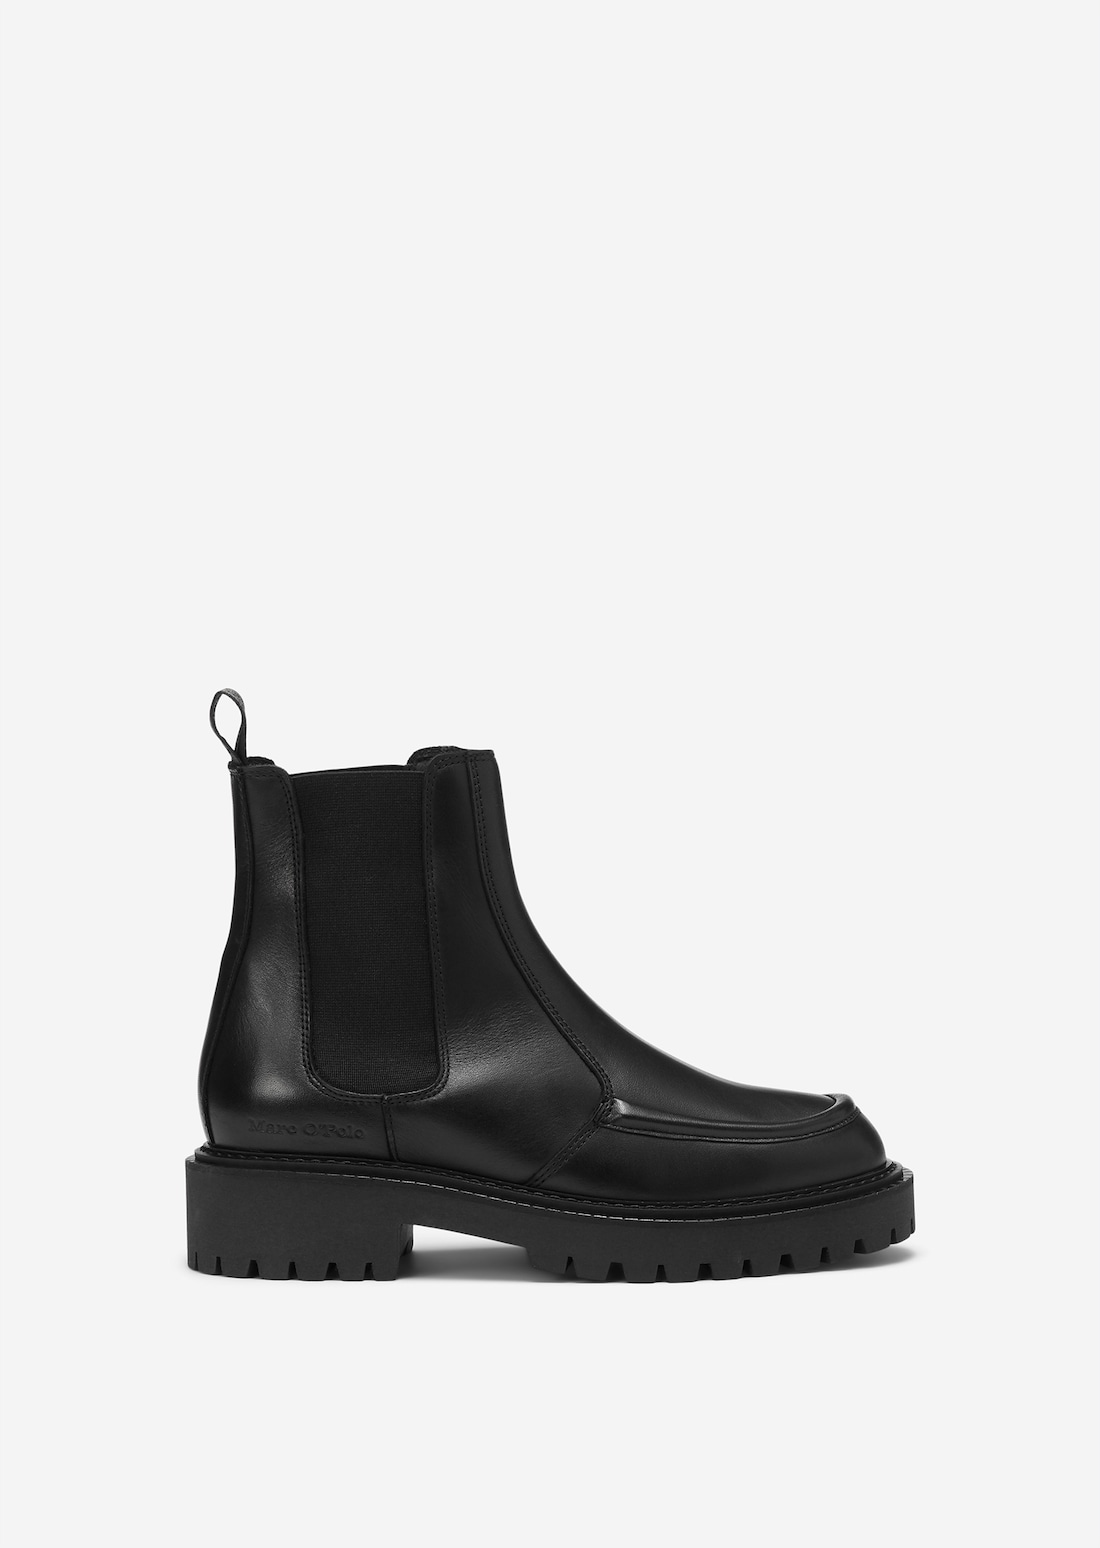 Ankle boot with a distinctive lightweight sole - black | Chelsea boots ...